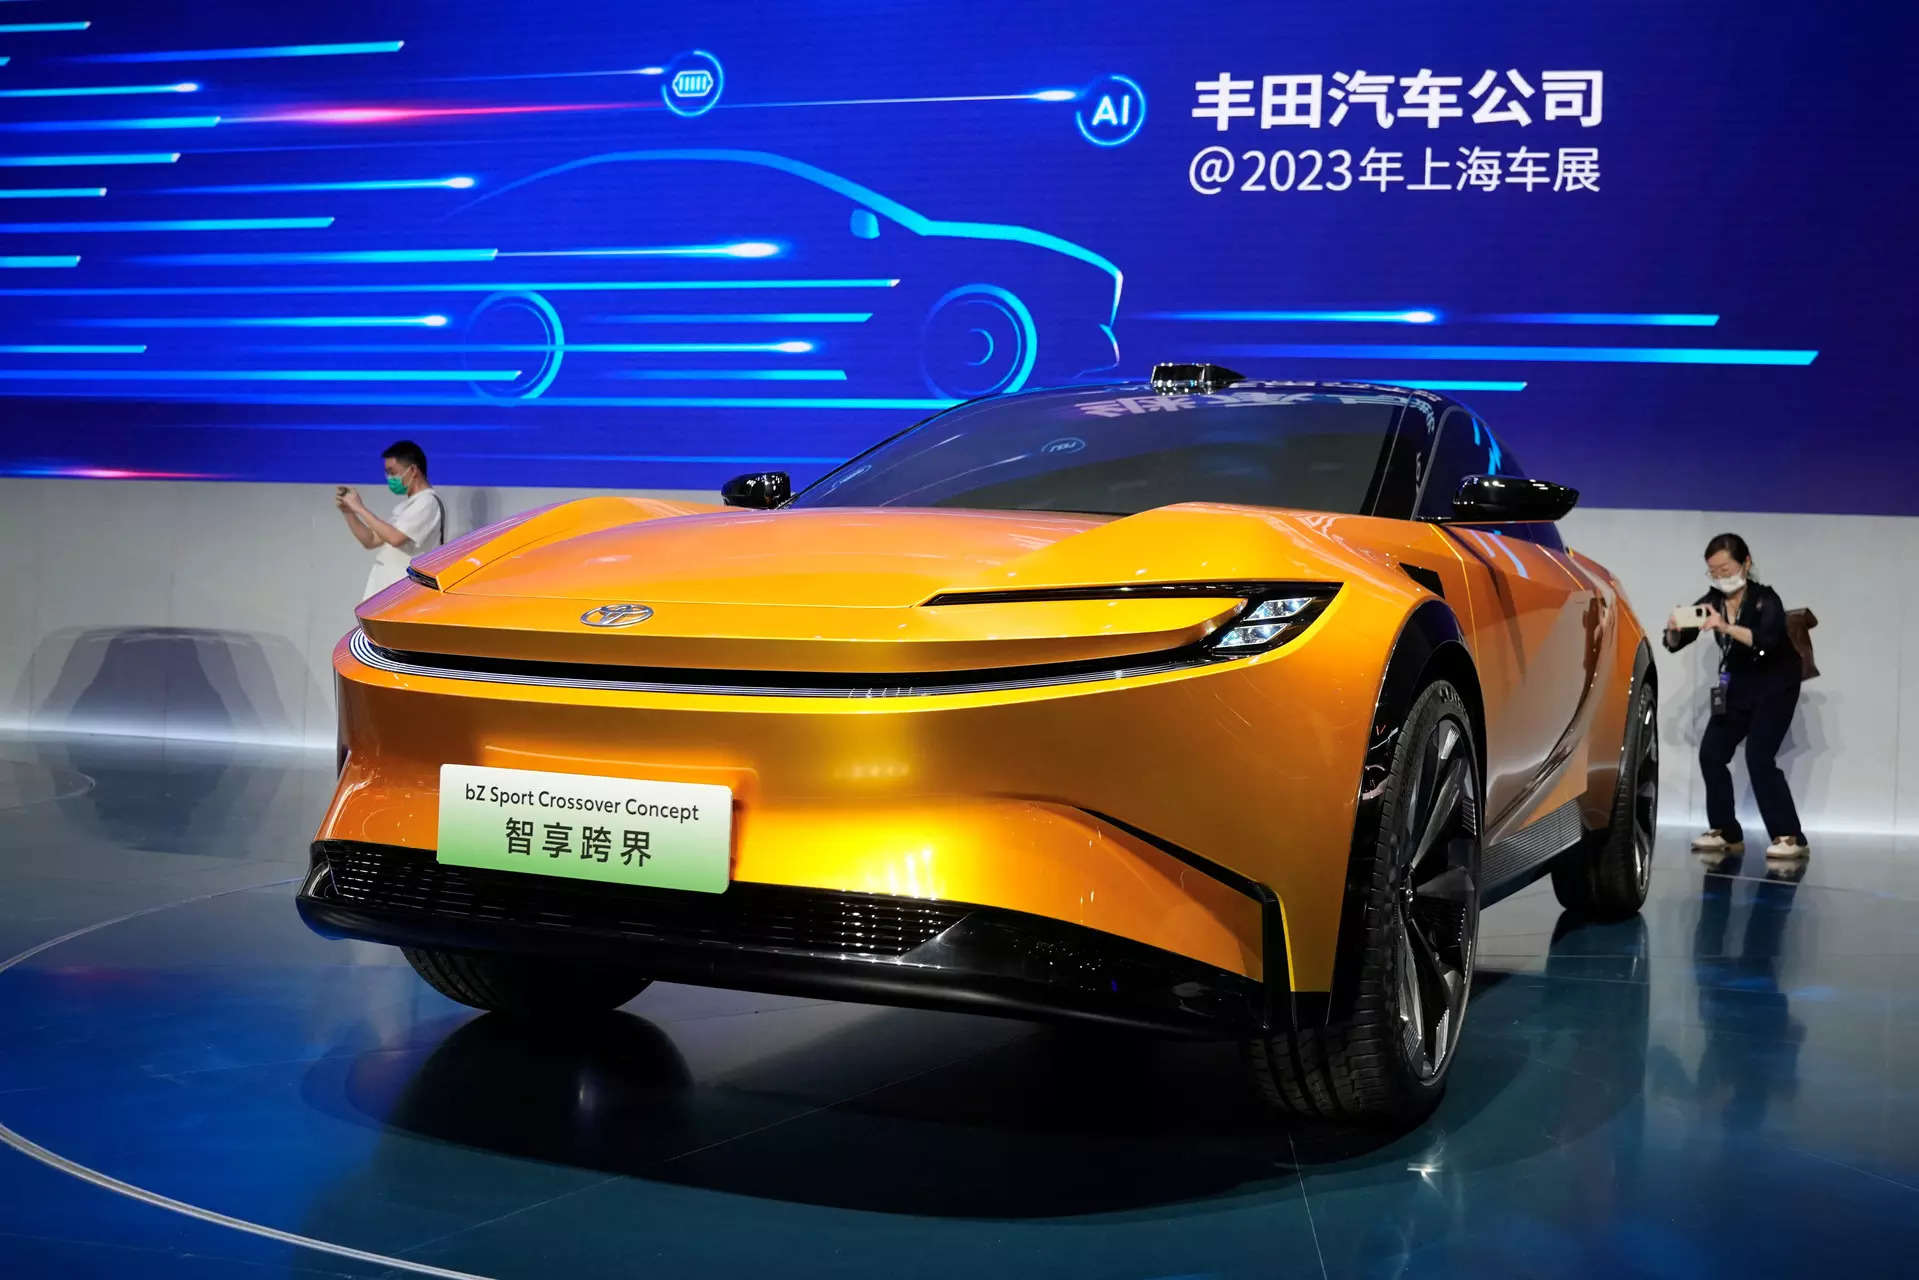 30 images of swanky cars at Shanghai Auto Show 2023